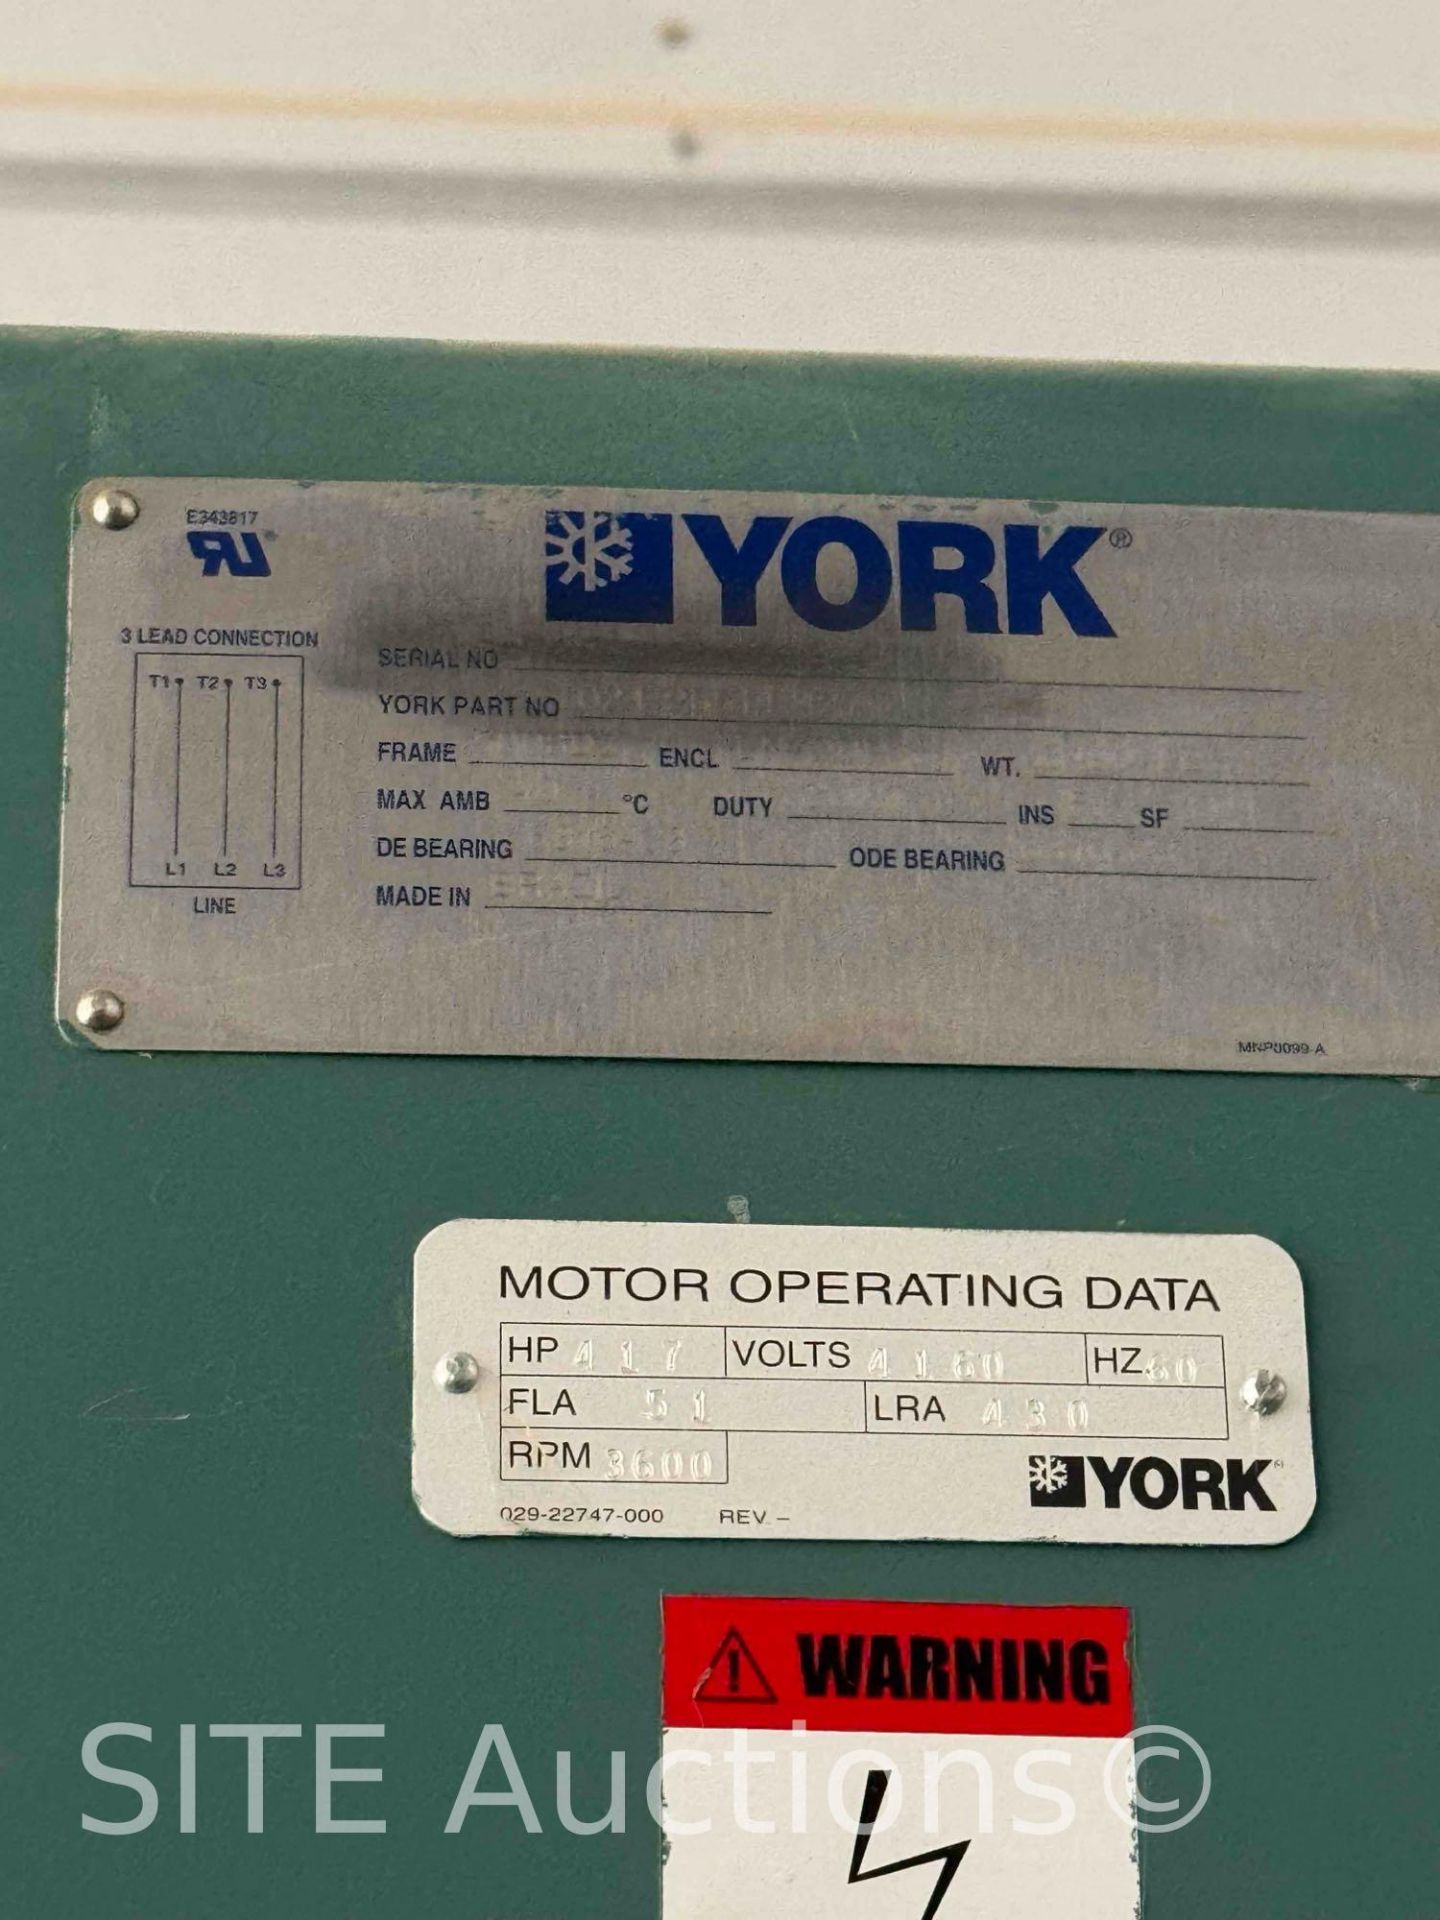 UNUSED 2012 York by Johnson Controls MaxE Centrifugal Chiller - Image 18 of 21